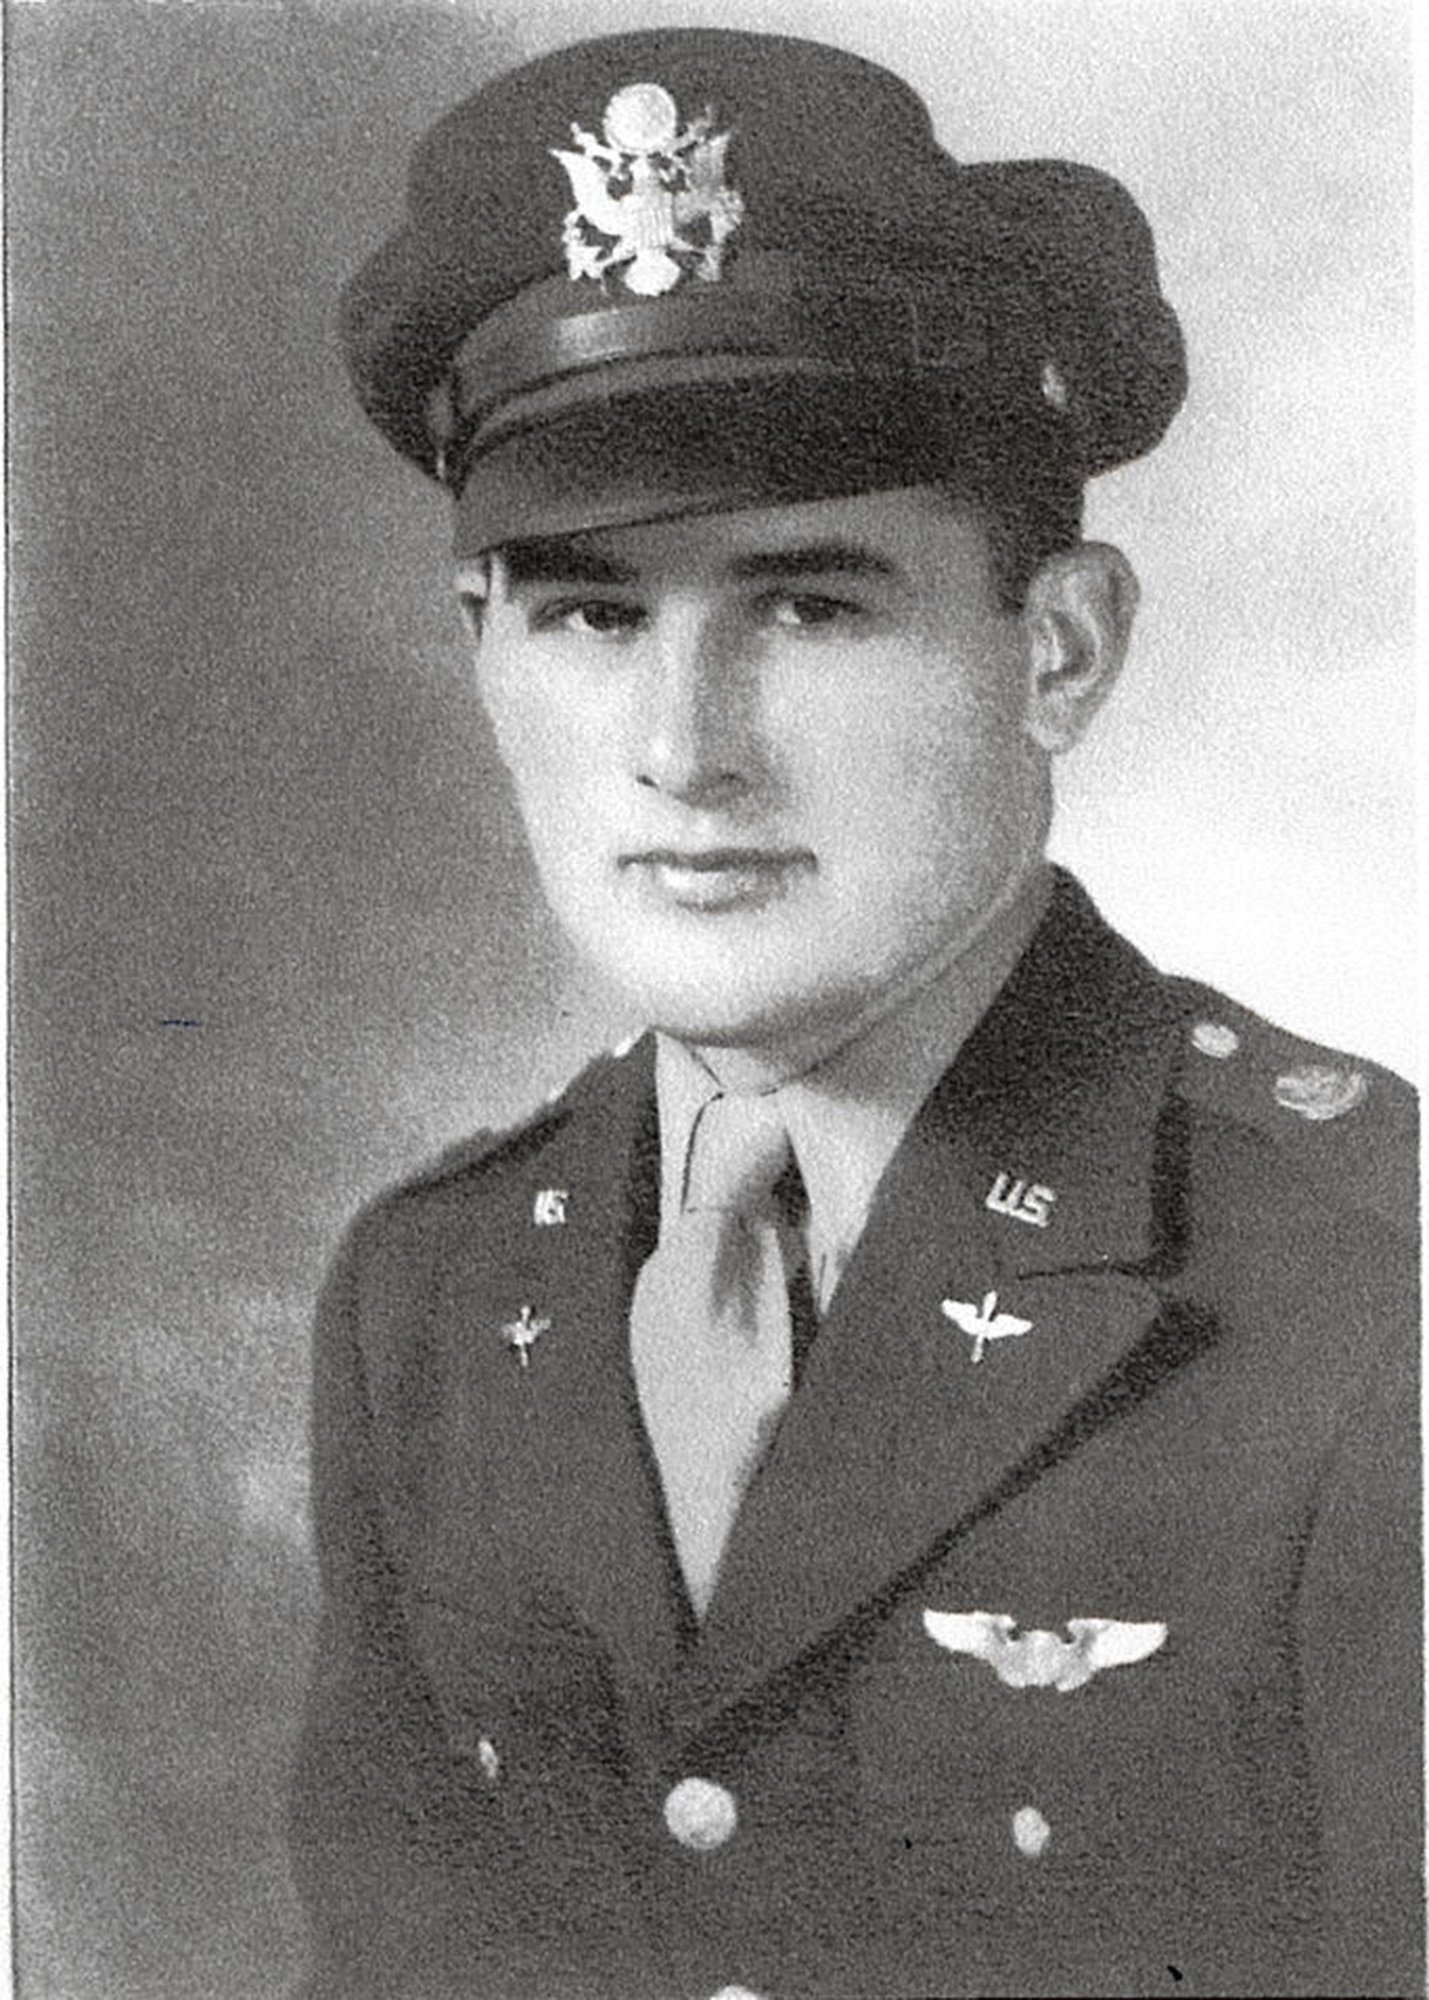 An official portrait of Don Clark, circa World War II. Clark, a C-47A Skytrain pilot flew 81 missions, to include 27 combat missions, in Europe during World War II. (Courtesy photo)